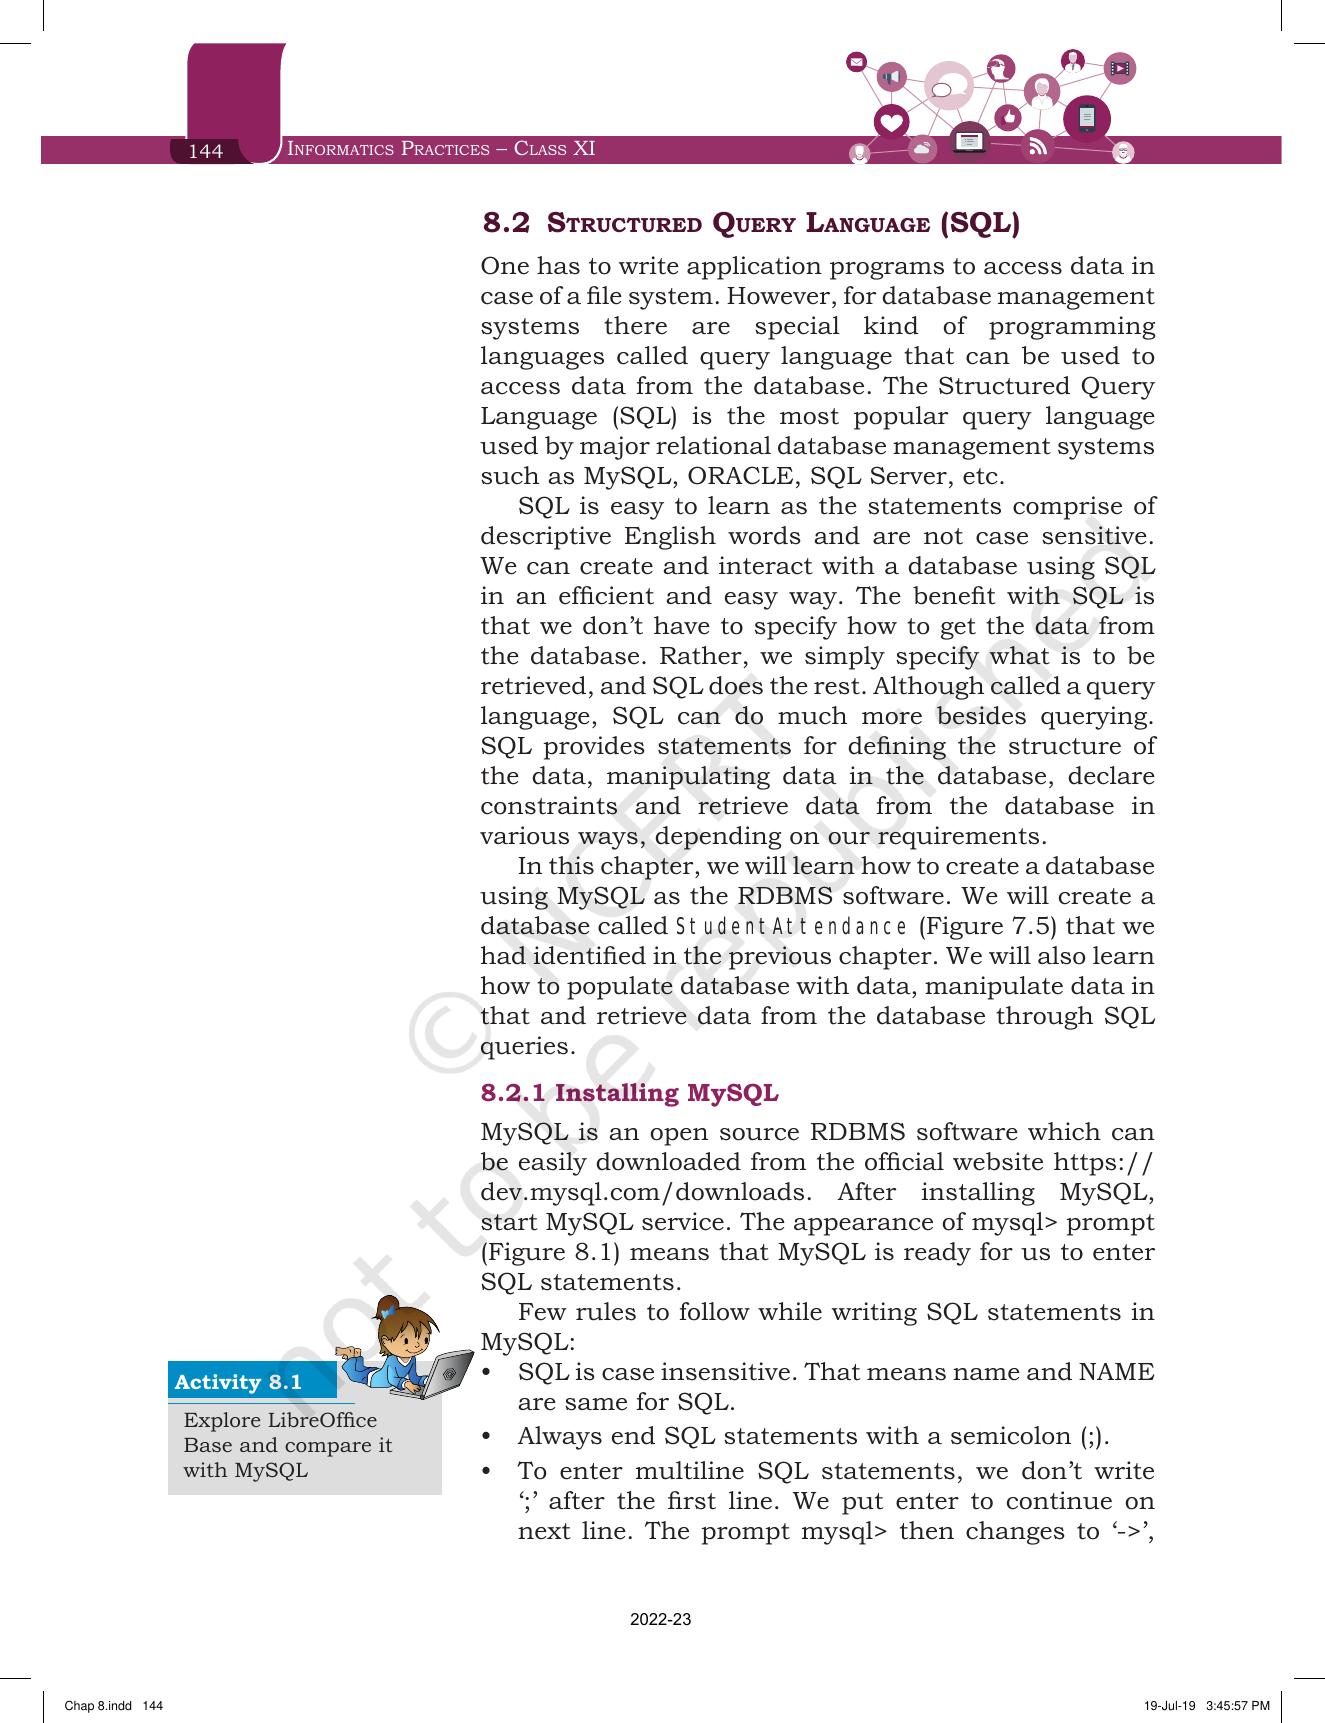 NCERT Book for Class 11 Informatics Practices Chapter 8 Introduction to Structured Query Language (SQL) - Page 2